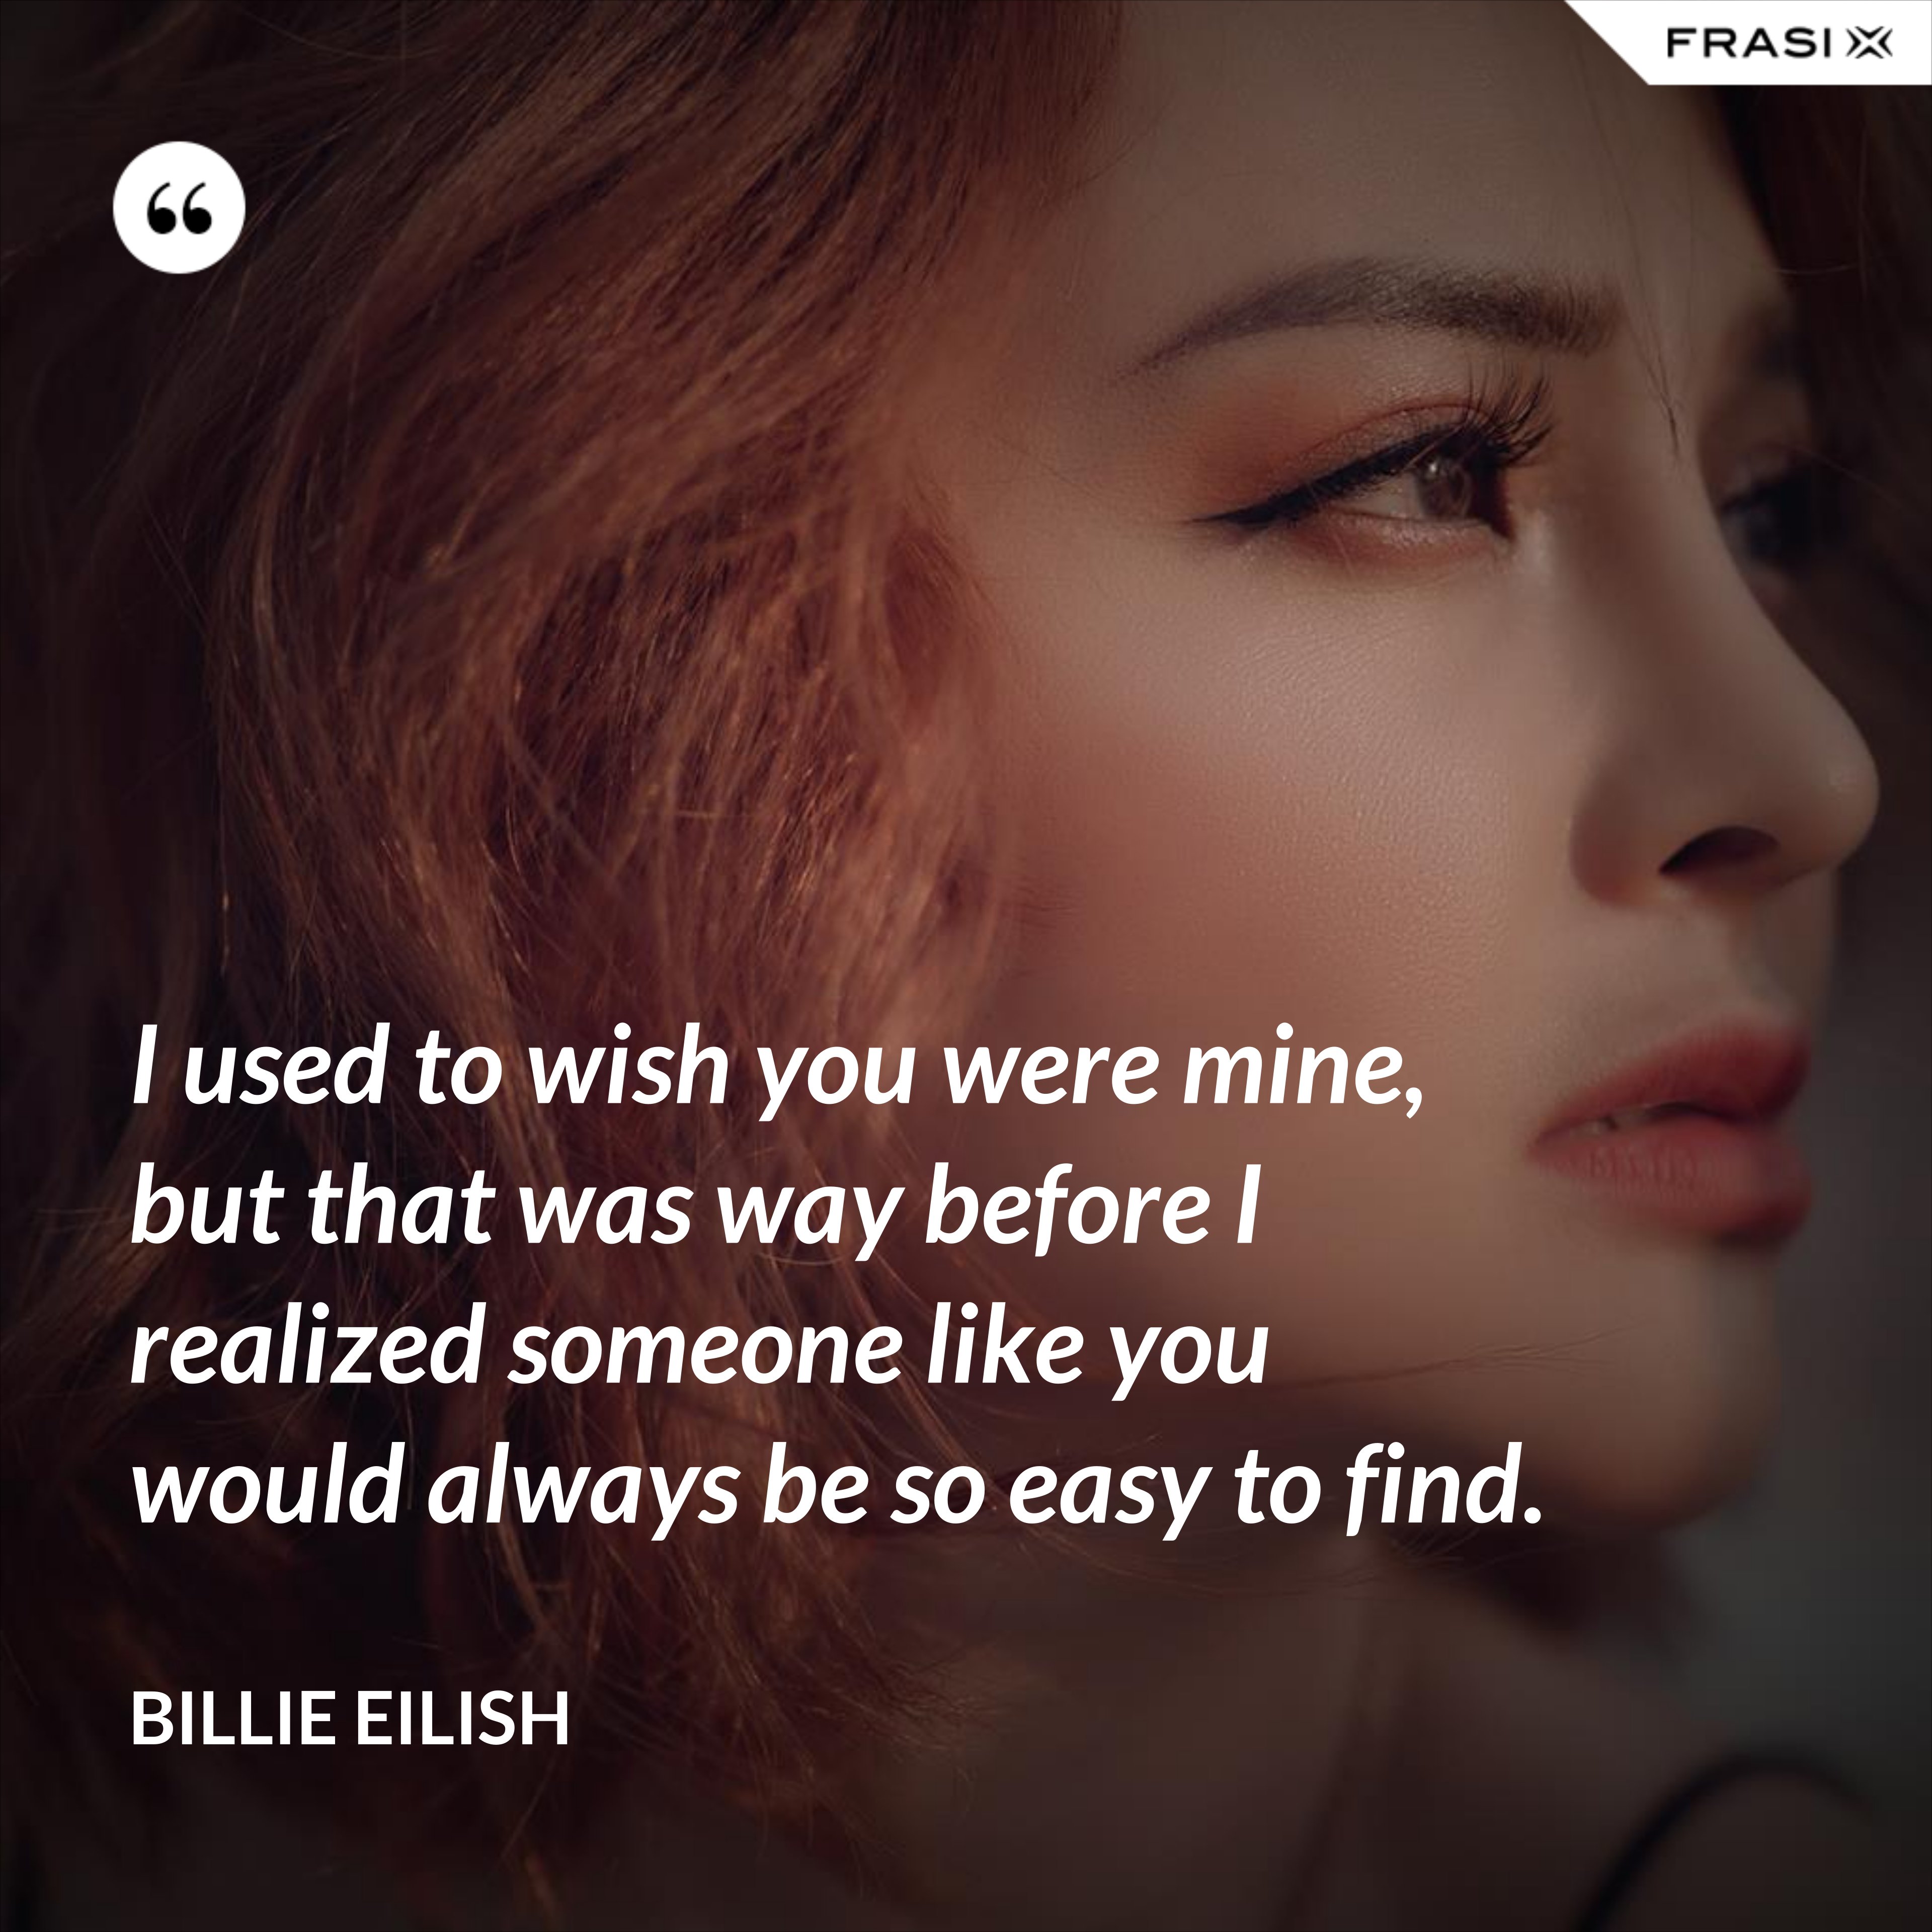 I used to wish you were mine, but that was way before I realized someone like you would always be so easy to find. - Billie Eilish